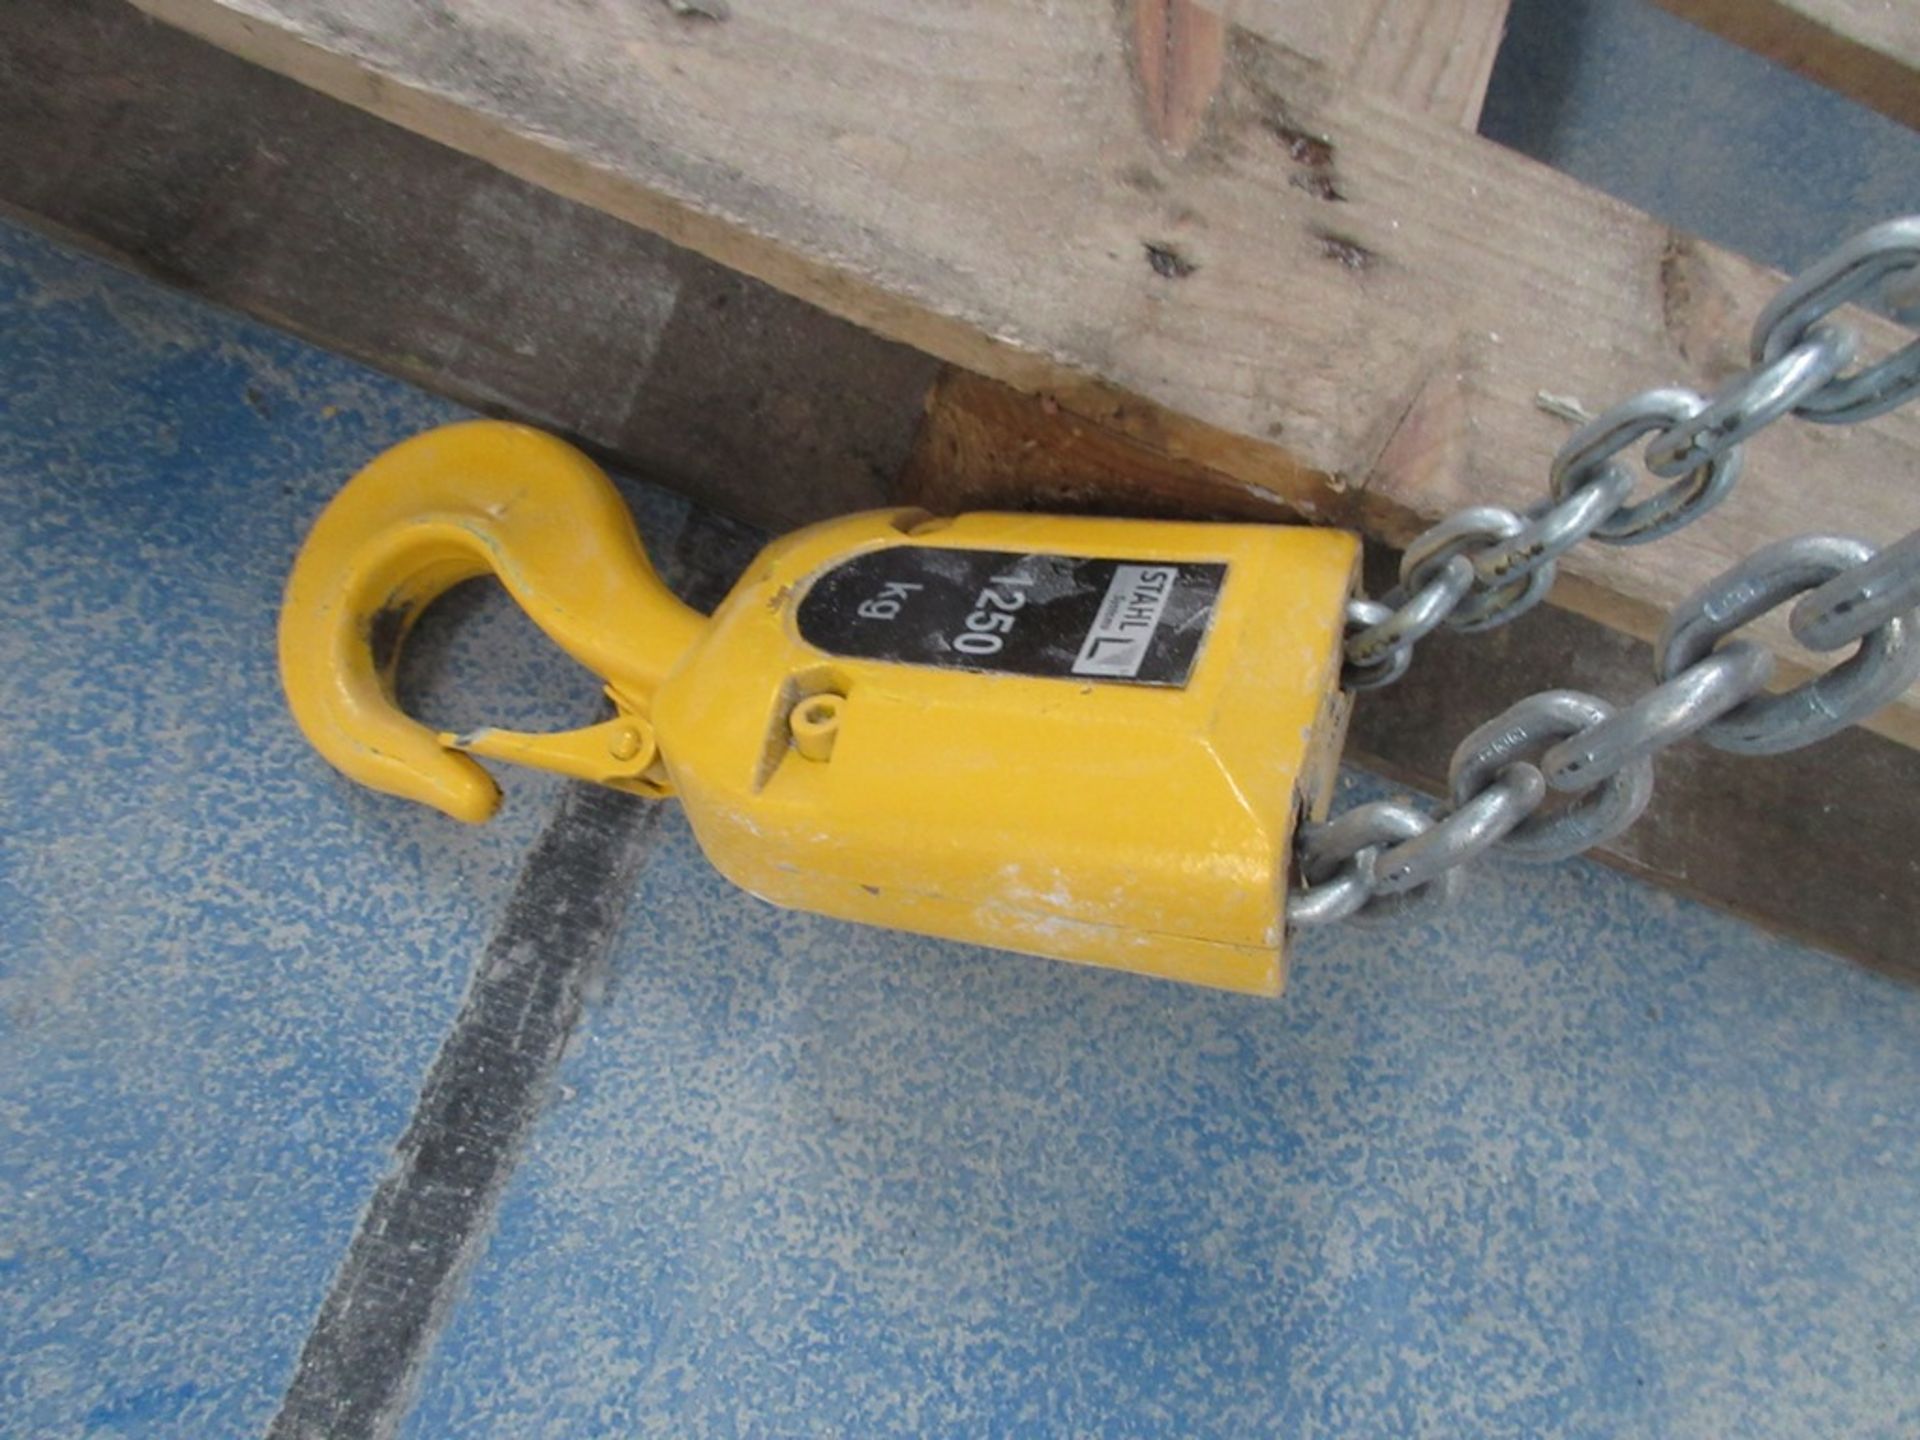 Stahl ST 2010-8/21/1 1000kg chain hoist with pedant control, with steel runway, serial no. - Image 3 of 4